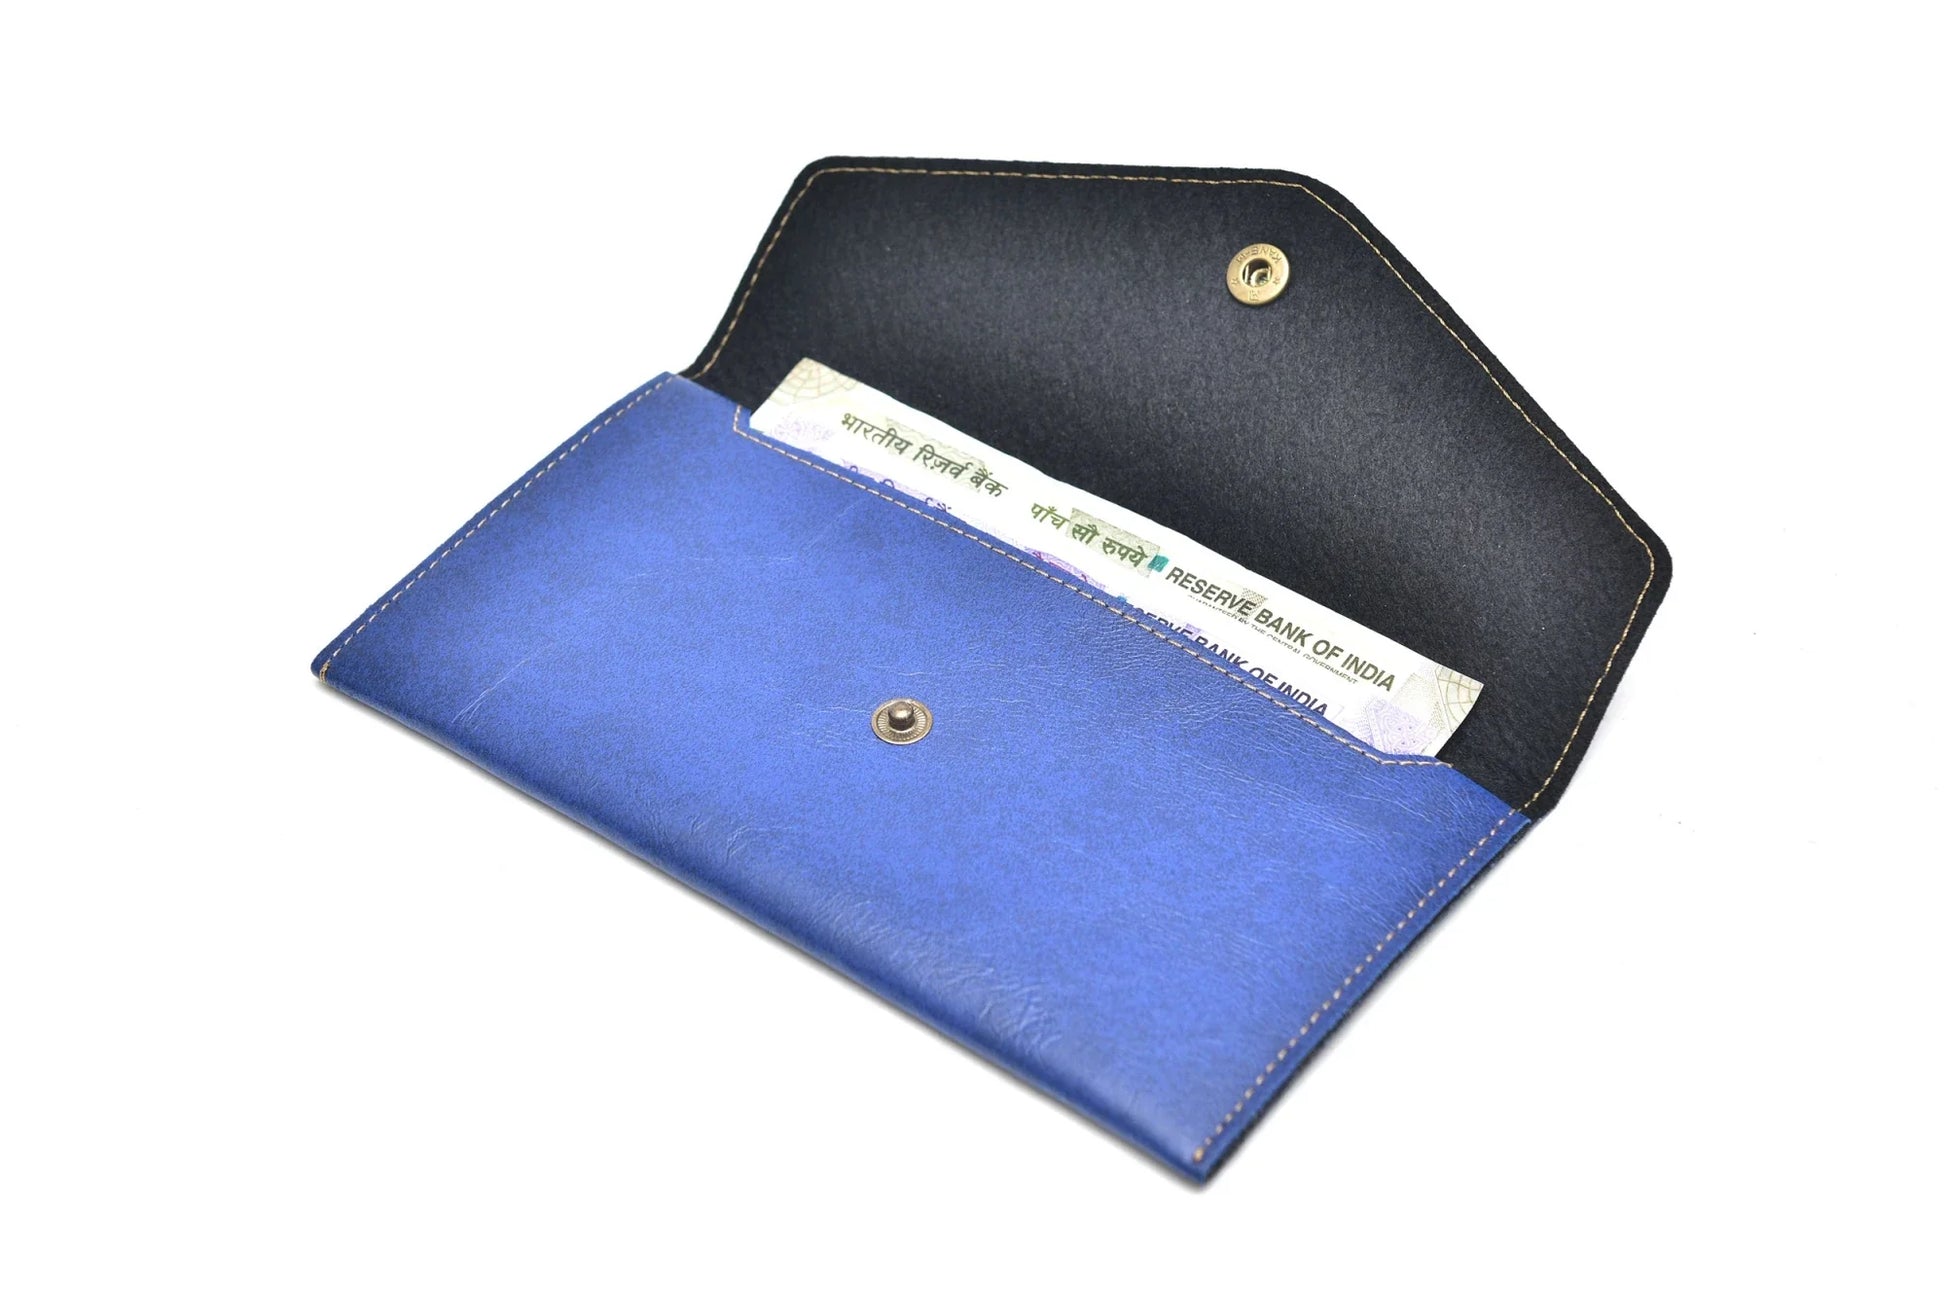 Inside or open view of royal blue minimal clutch